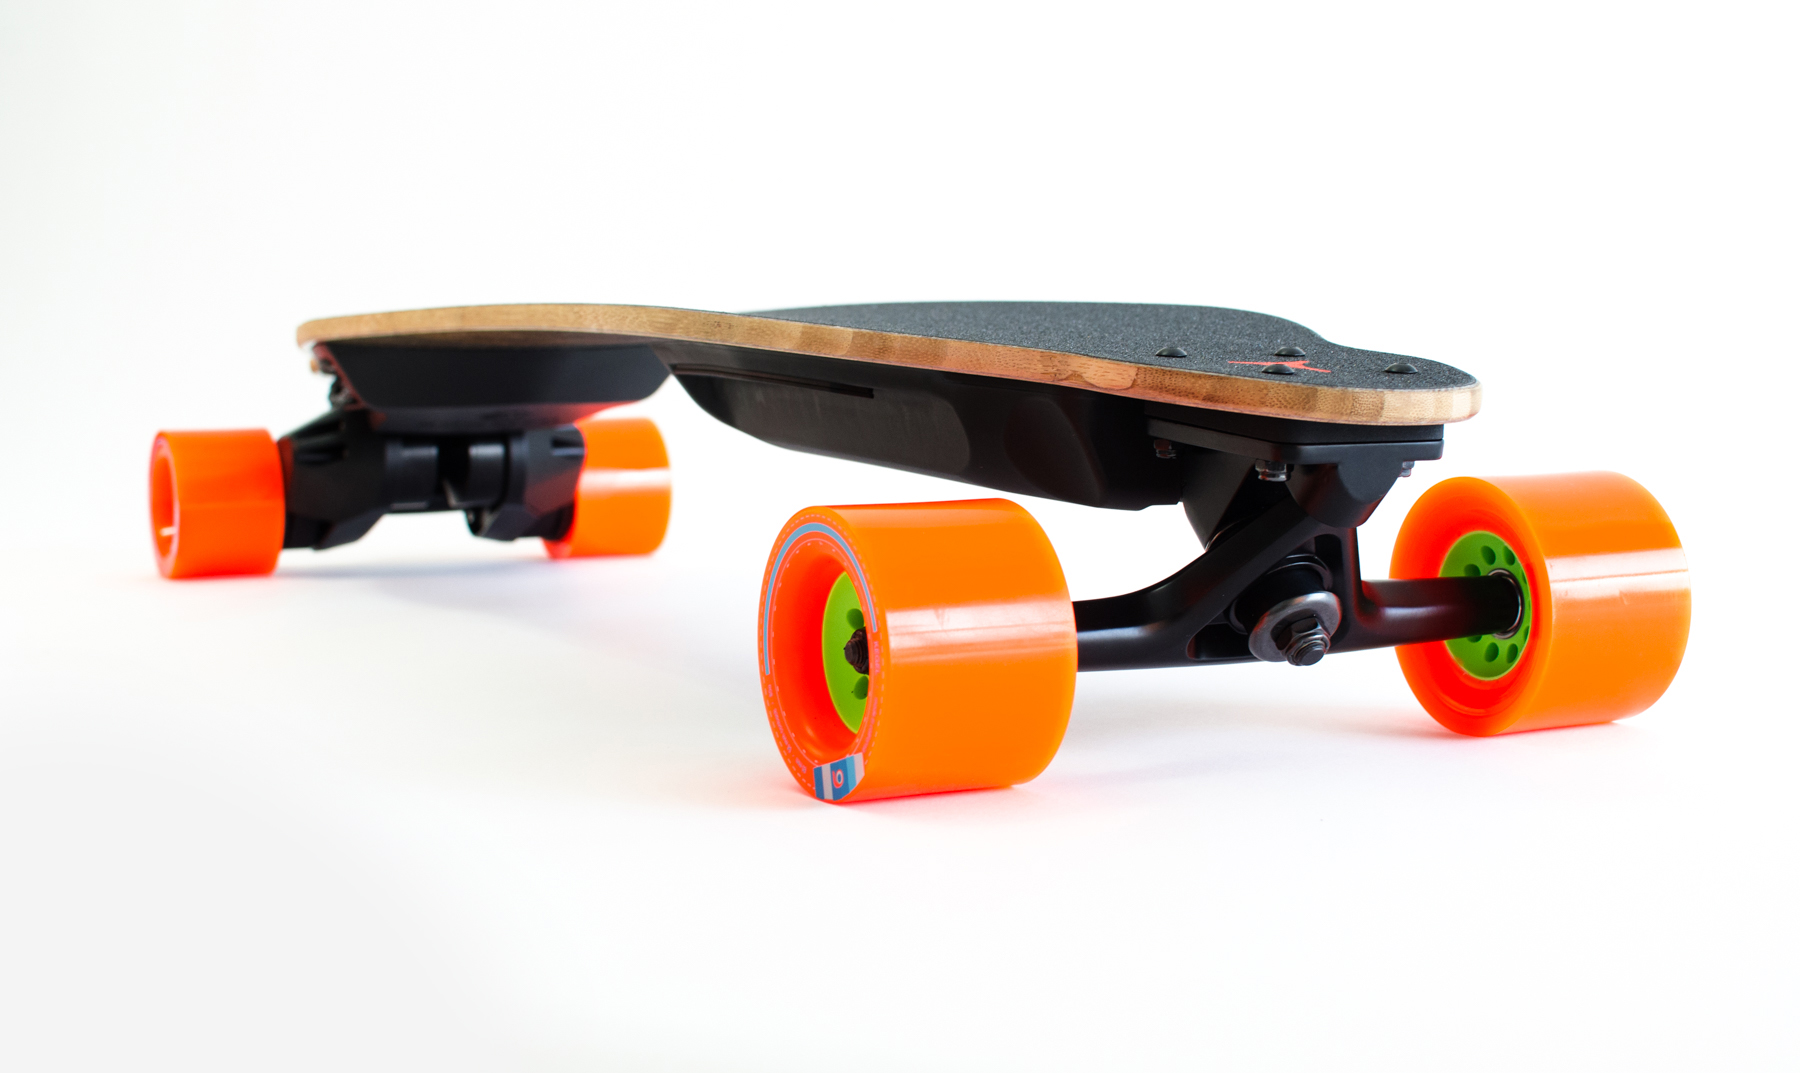 Boosted Board second generation photos